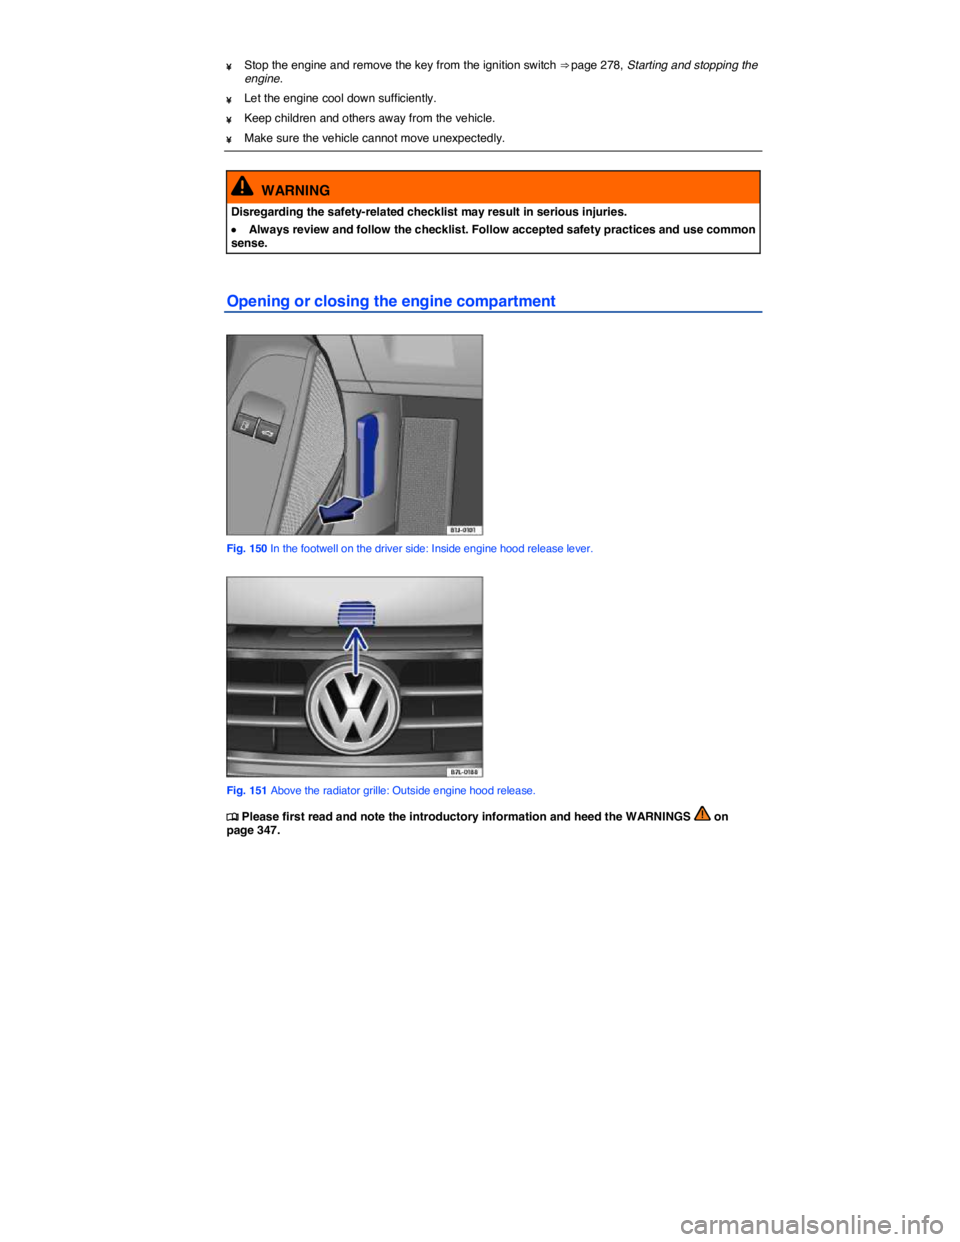 VOLKSWAGEN EOS 2011  Owners Manual  
¥ Stop the engine and remove the key from the ignition switch ⇒ page 278, Starting and stopping the engine. 
¥ Let the engine cool down sufficiently. 
¥ Keep children and others away from the